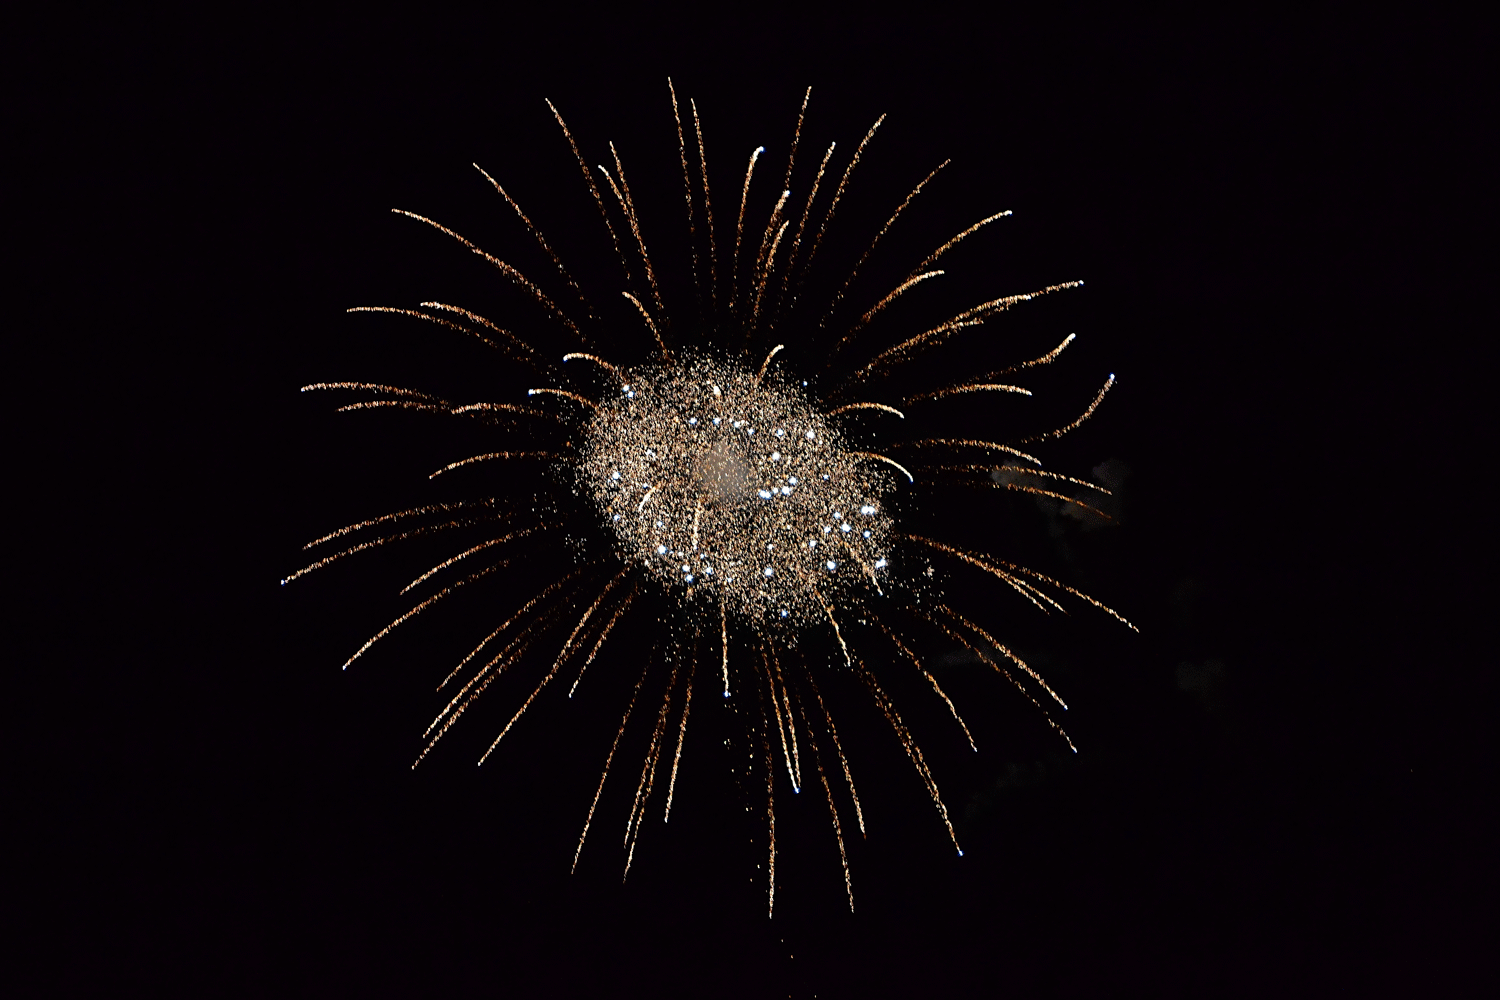 Gloucester Fireworks, July 4th 2012